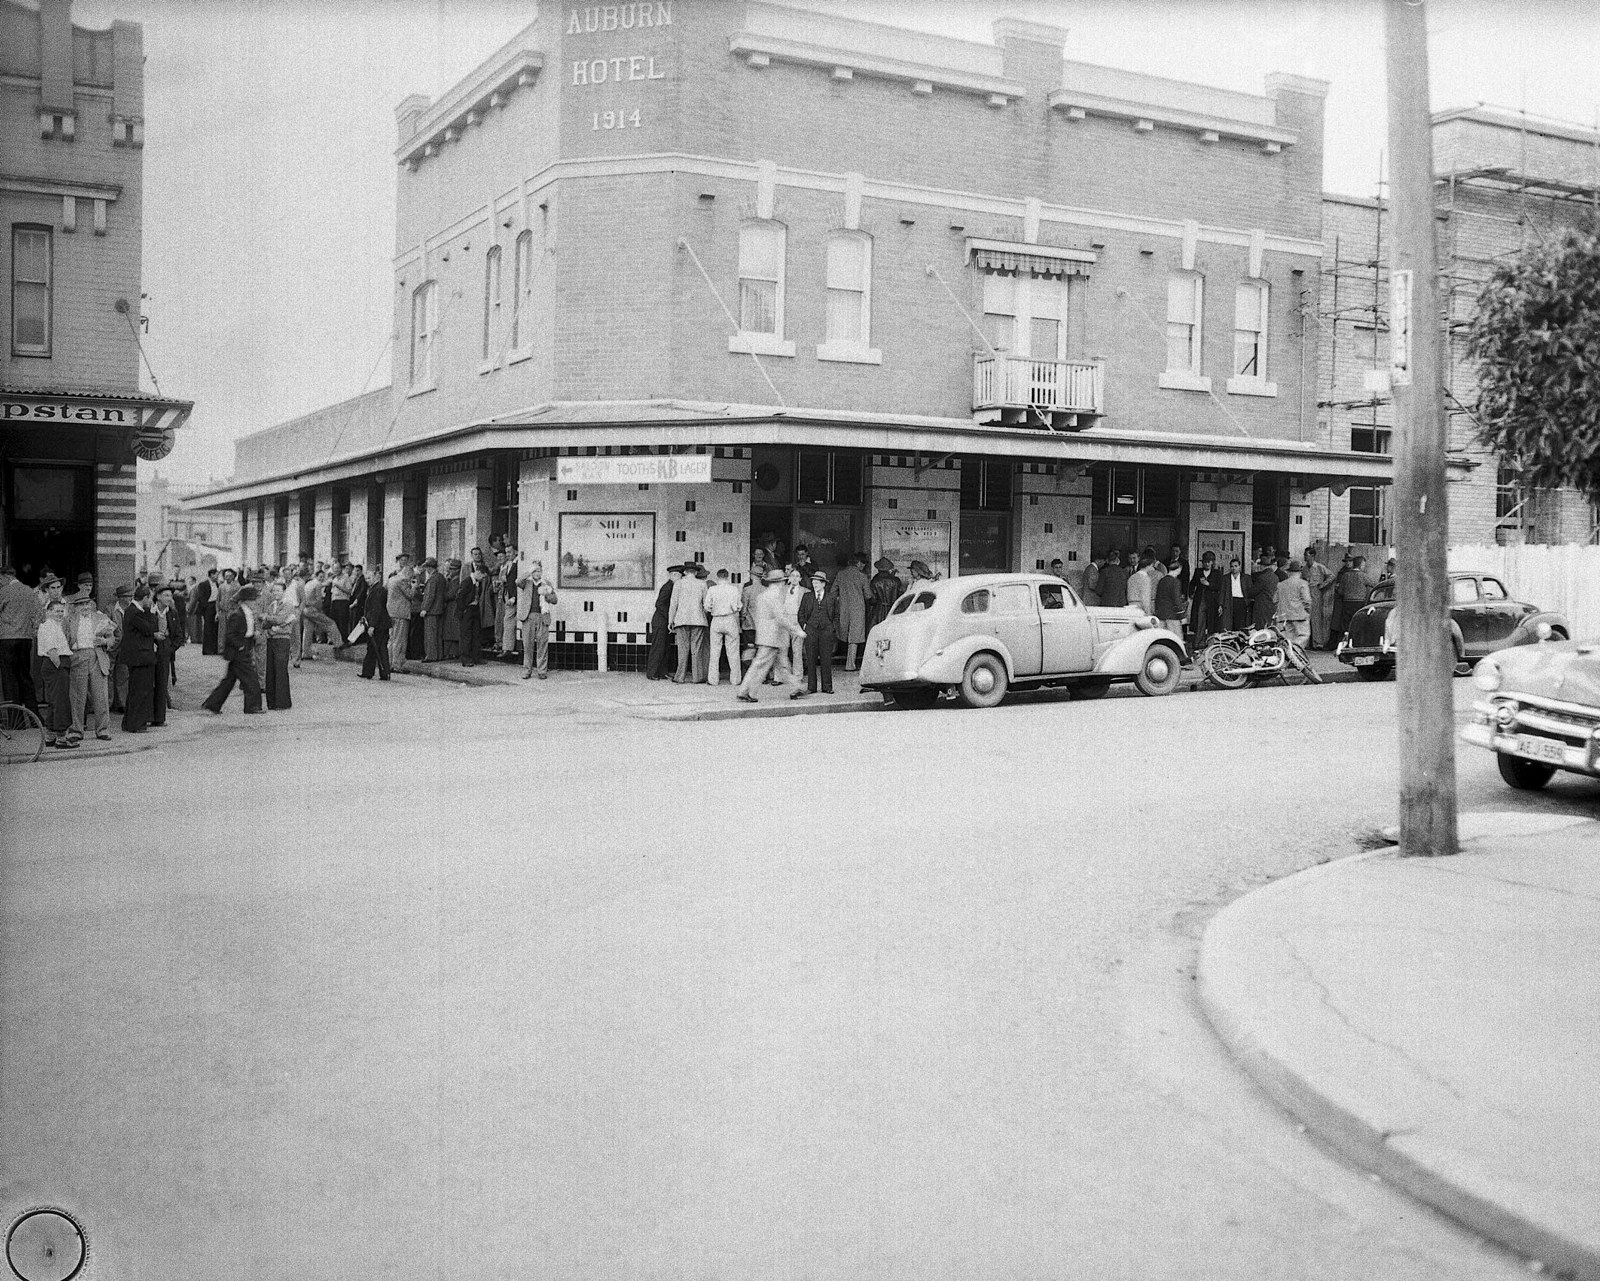 Outside of the Auburn Hotel showing a car and crowd gathered on the footpath